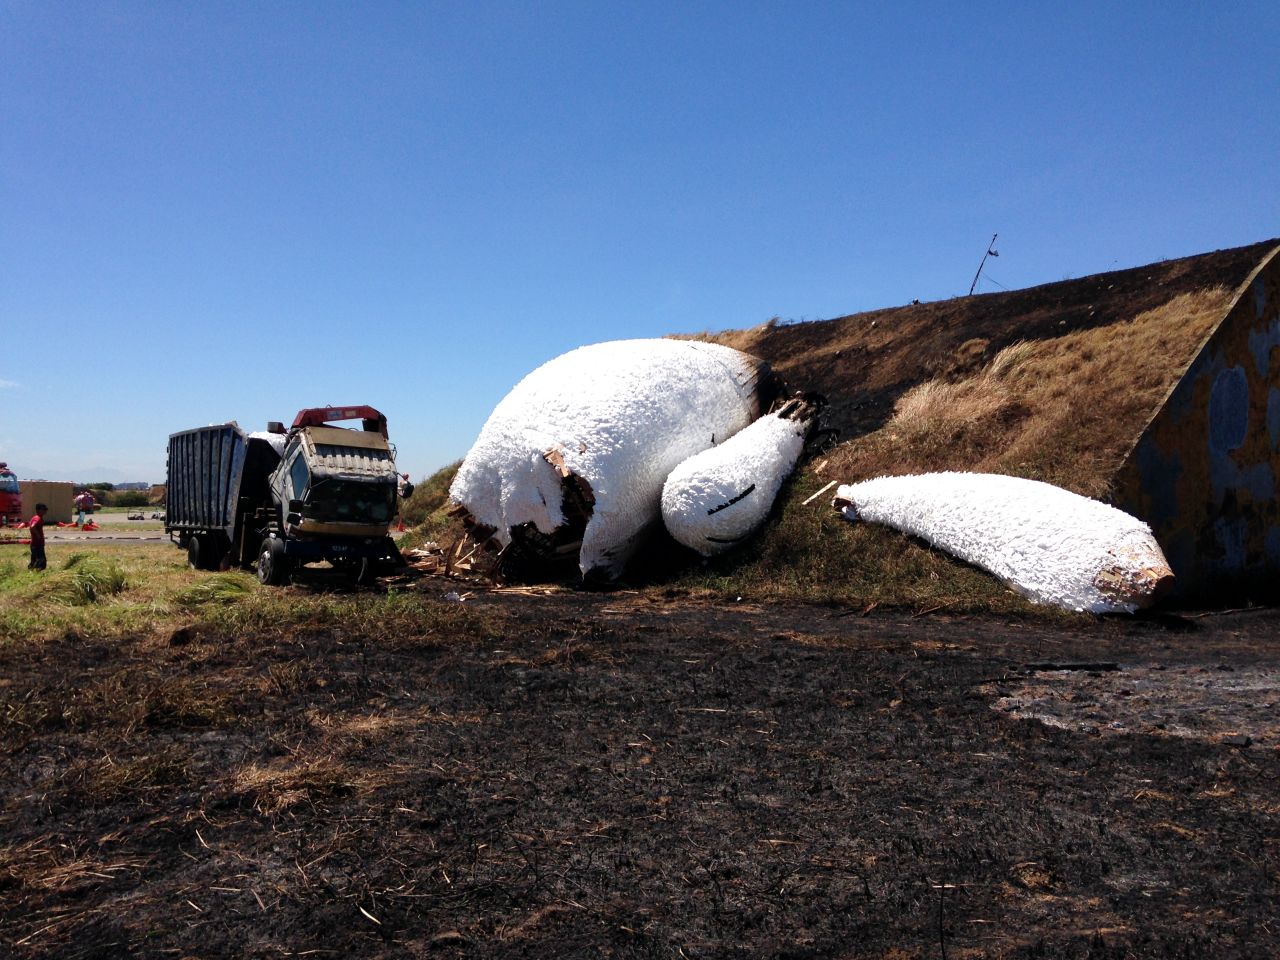 Bad news: Giant rabbit by Florentijn Hofman burnt. Good news: Most parts of the rabbit were safely removed and it survived the whole festival before the fire broke out.